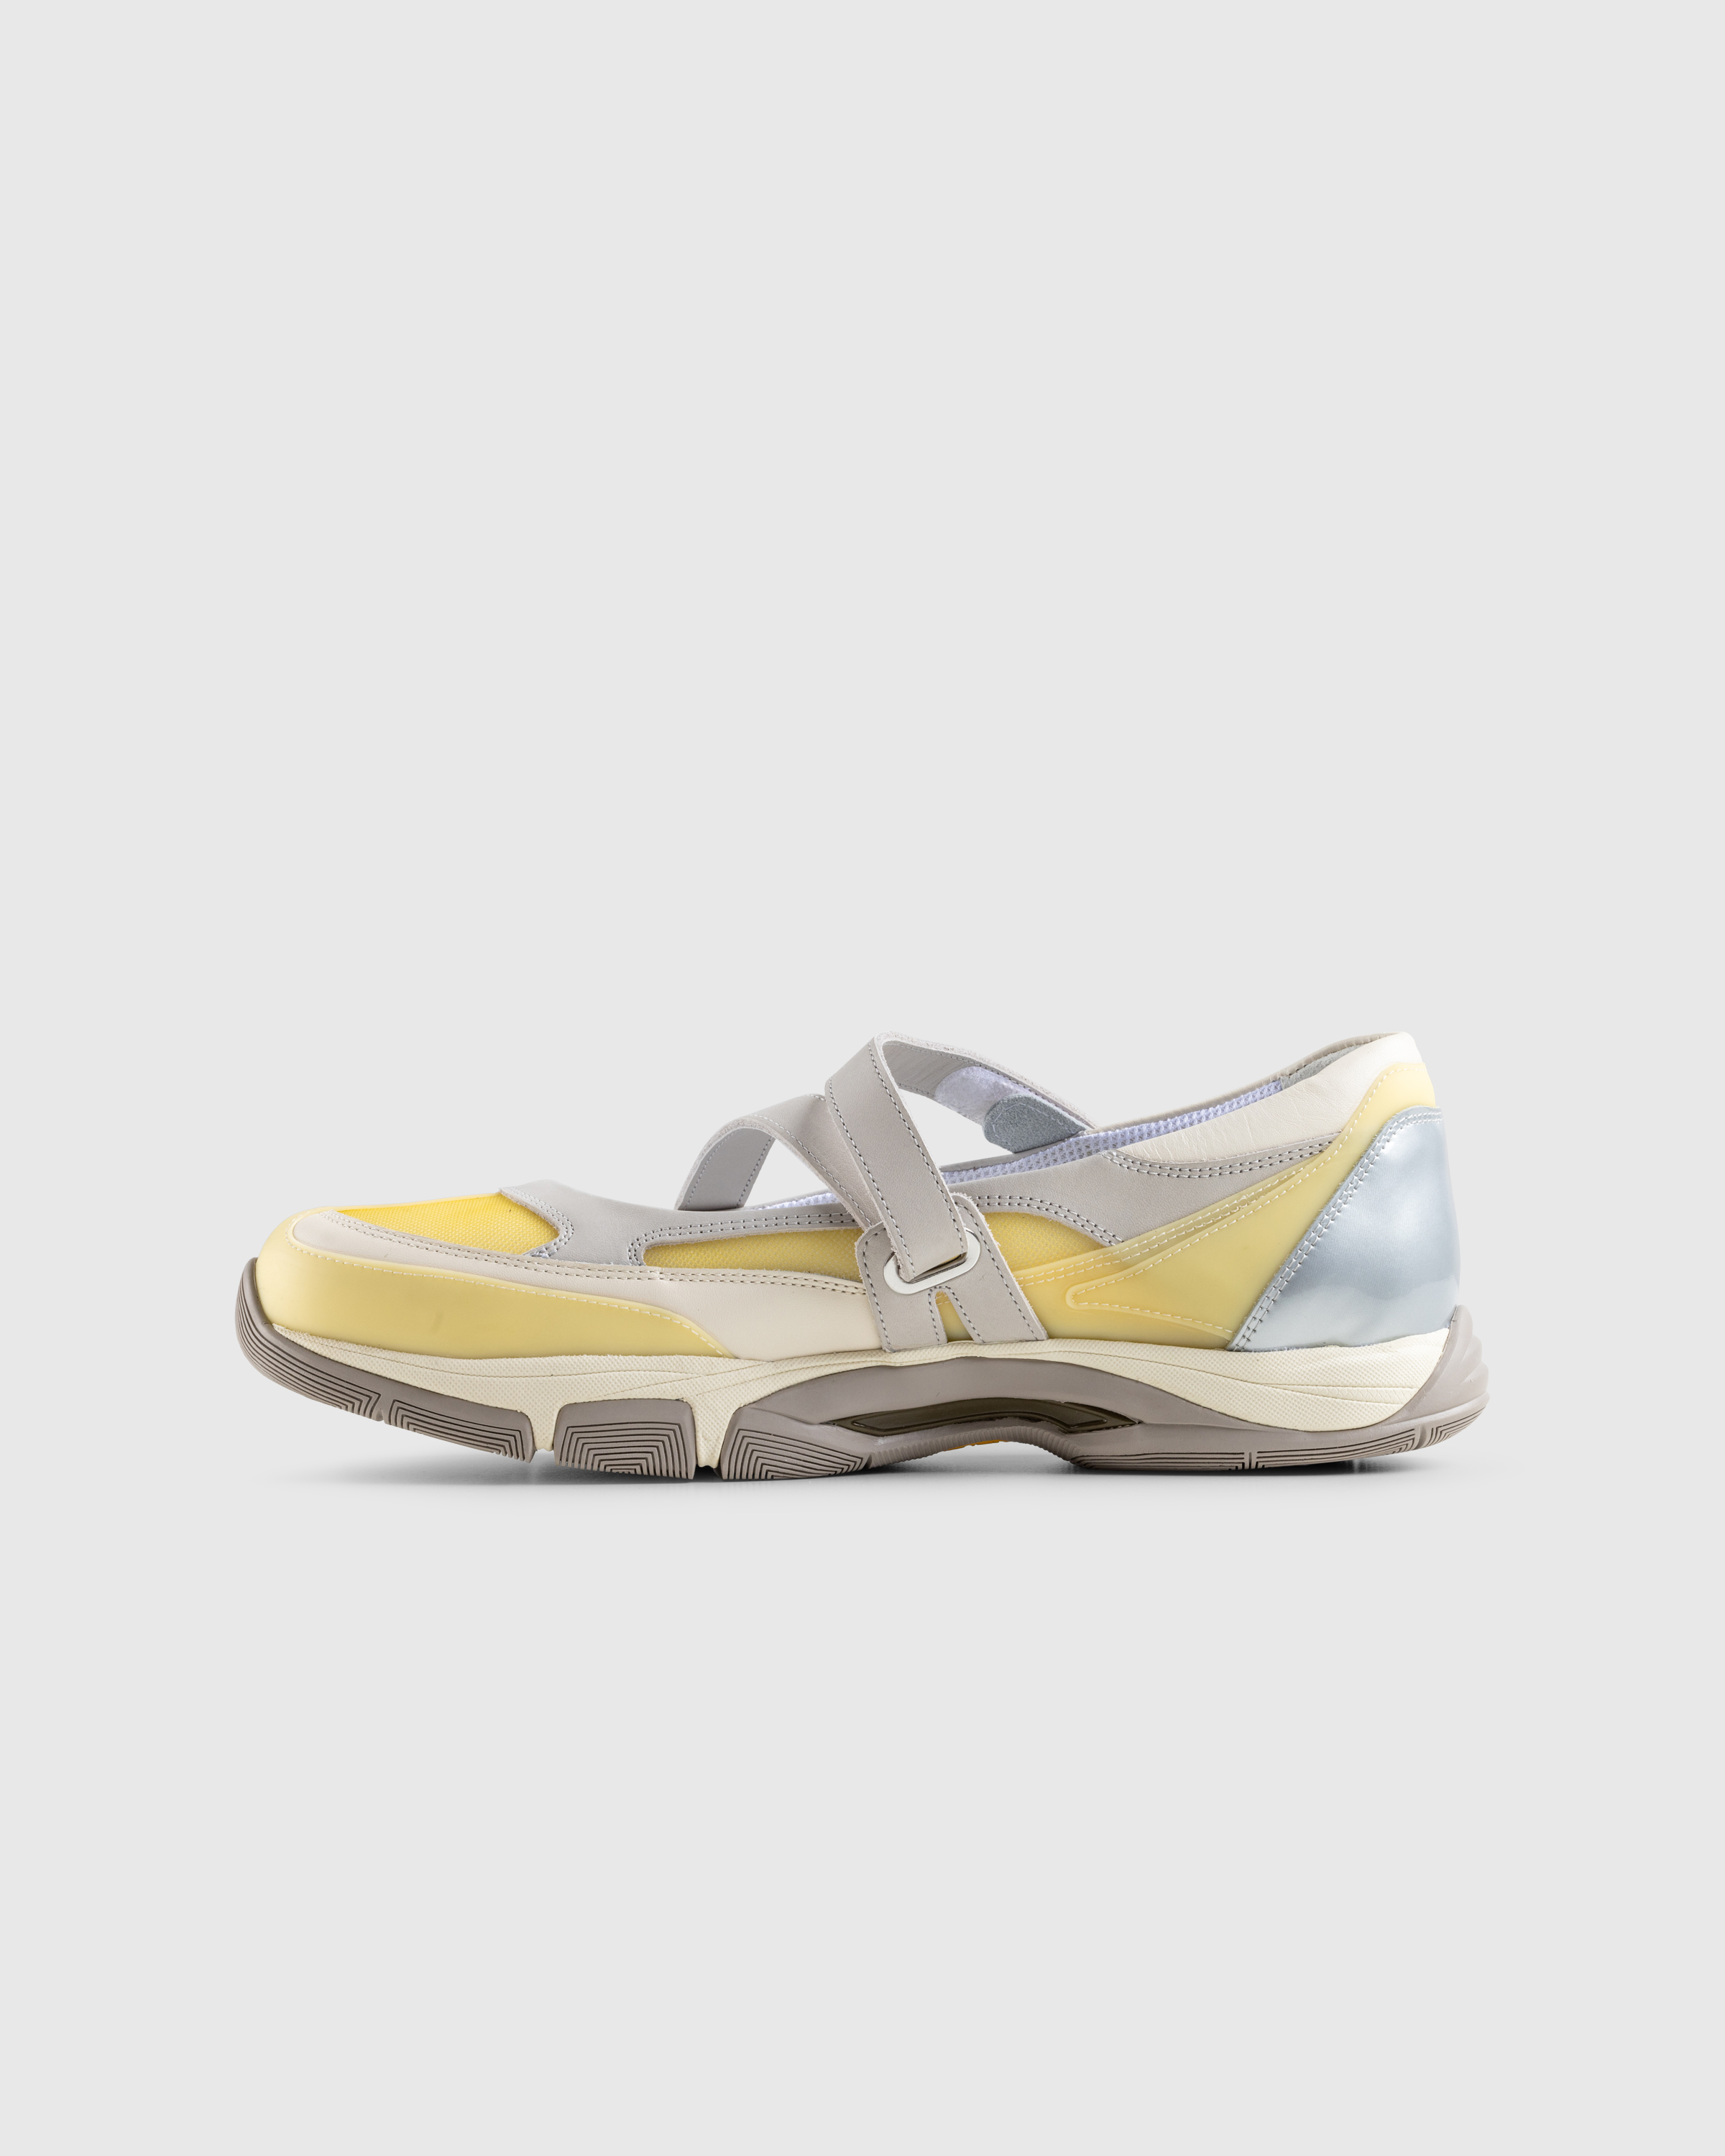 Our Legacy – Sweetheart Sport Technical Acid Leather - Shoes - Yellow - Image 2